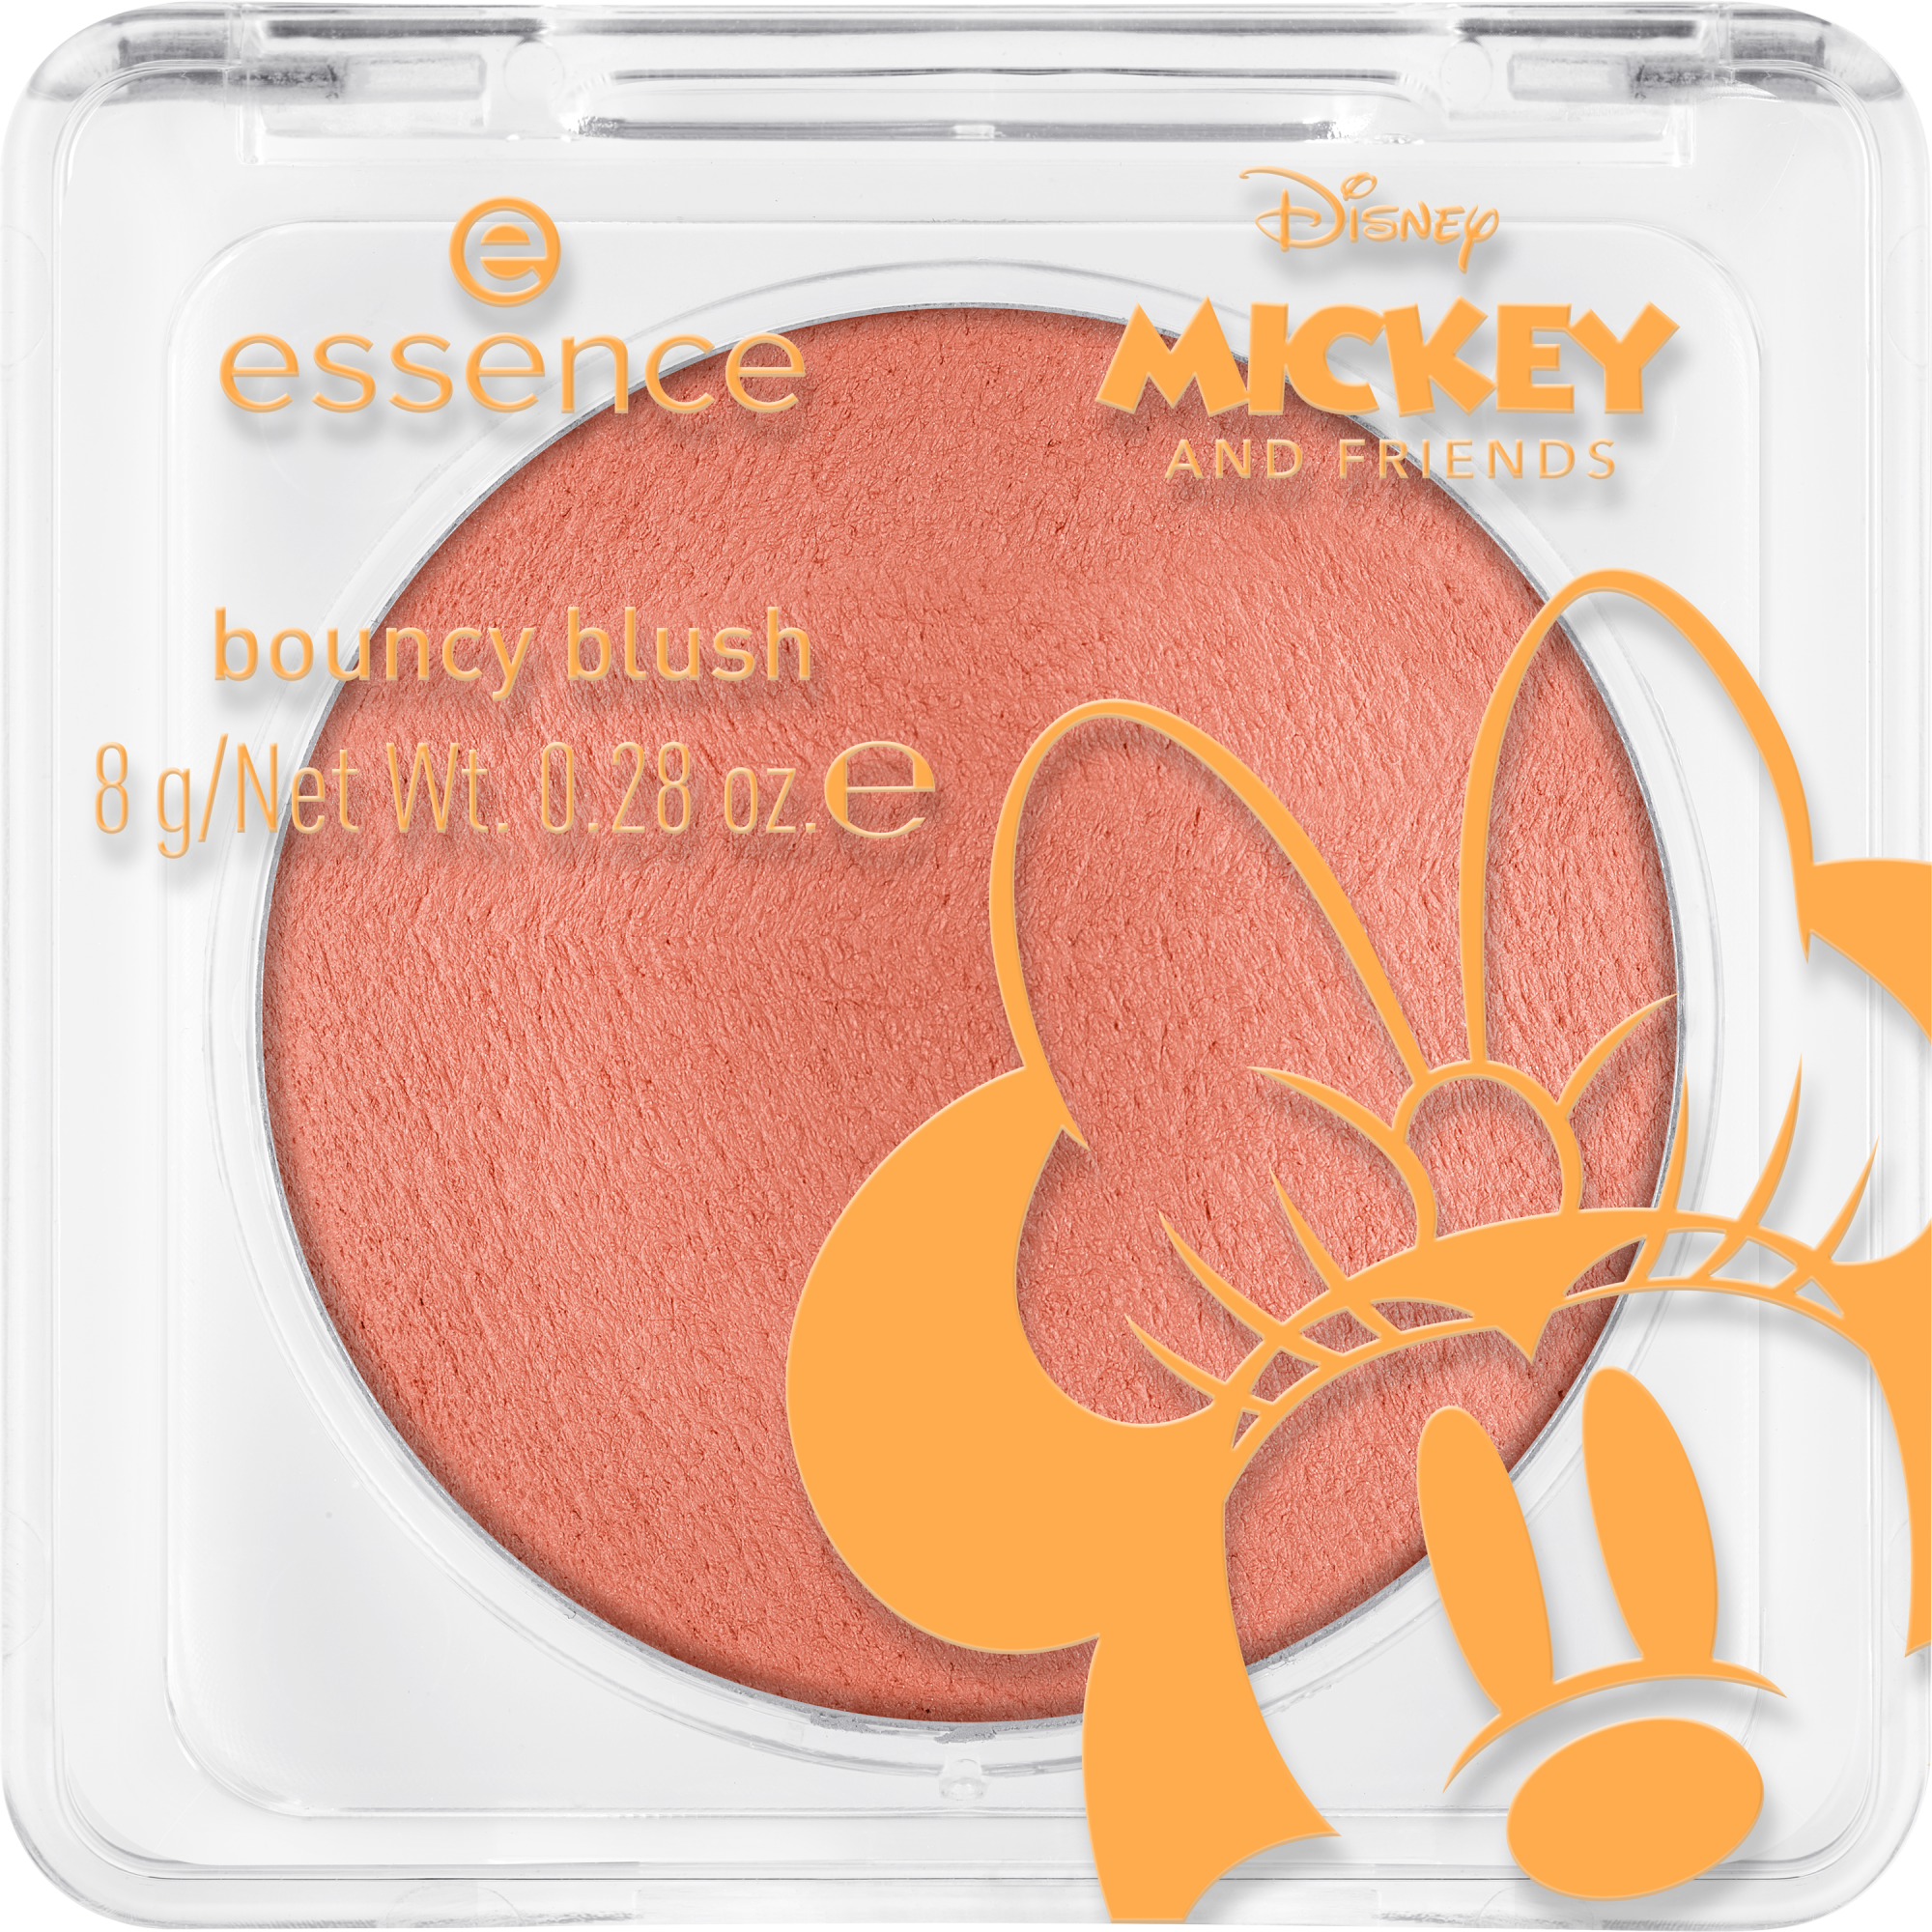 Disney Mickey and Friends bouncy blush